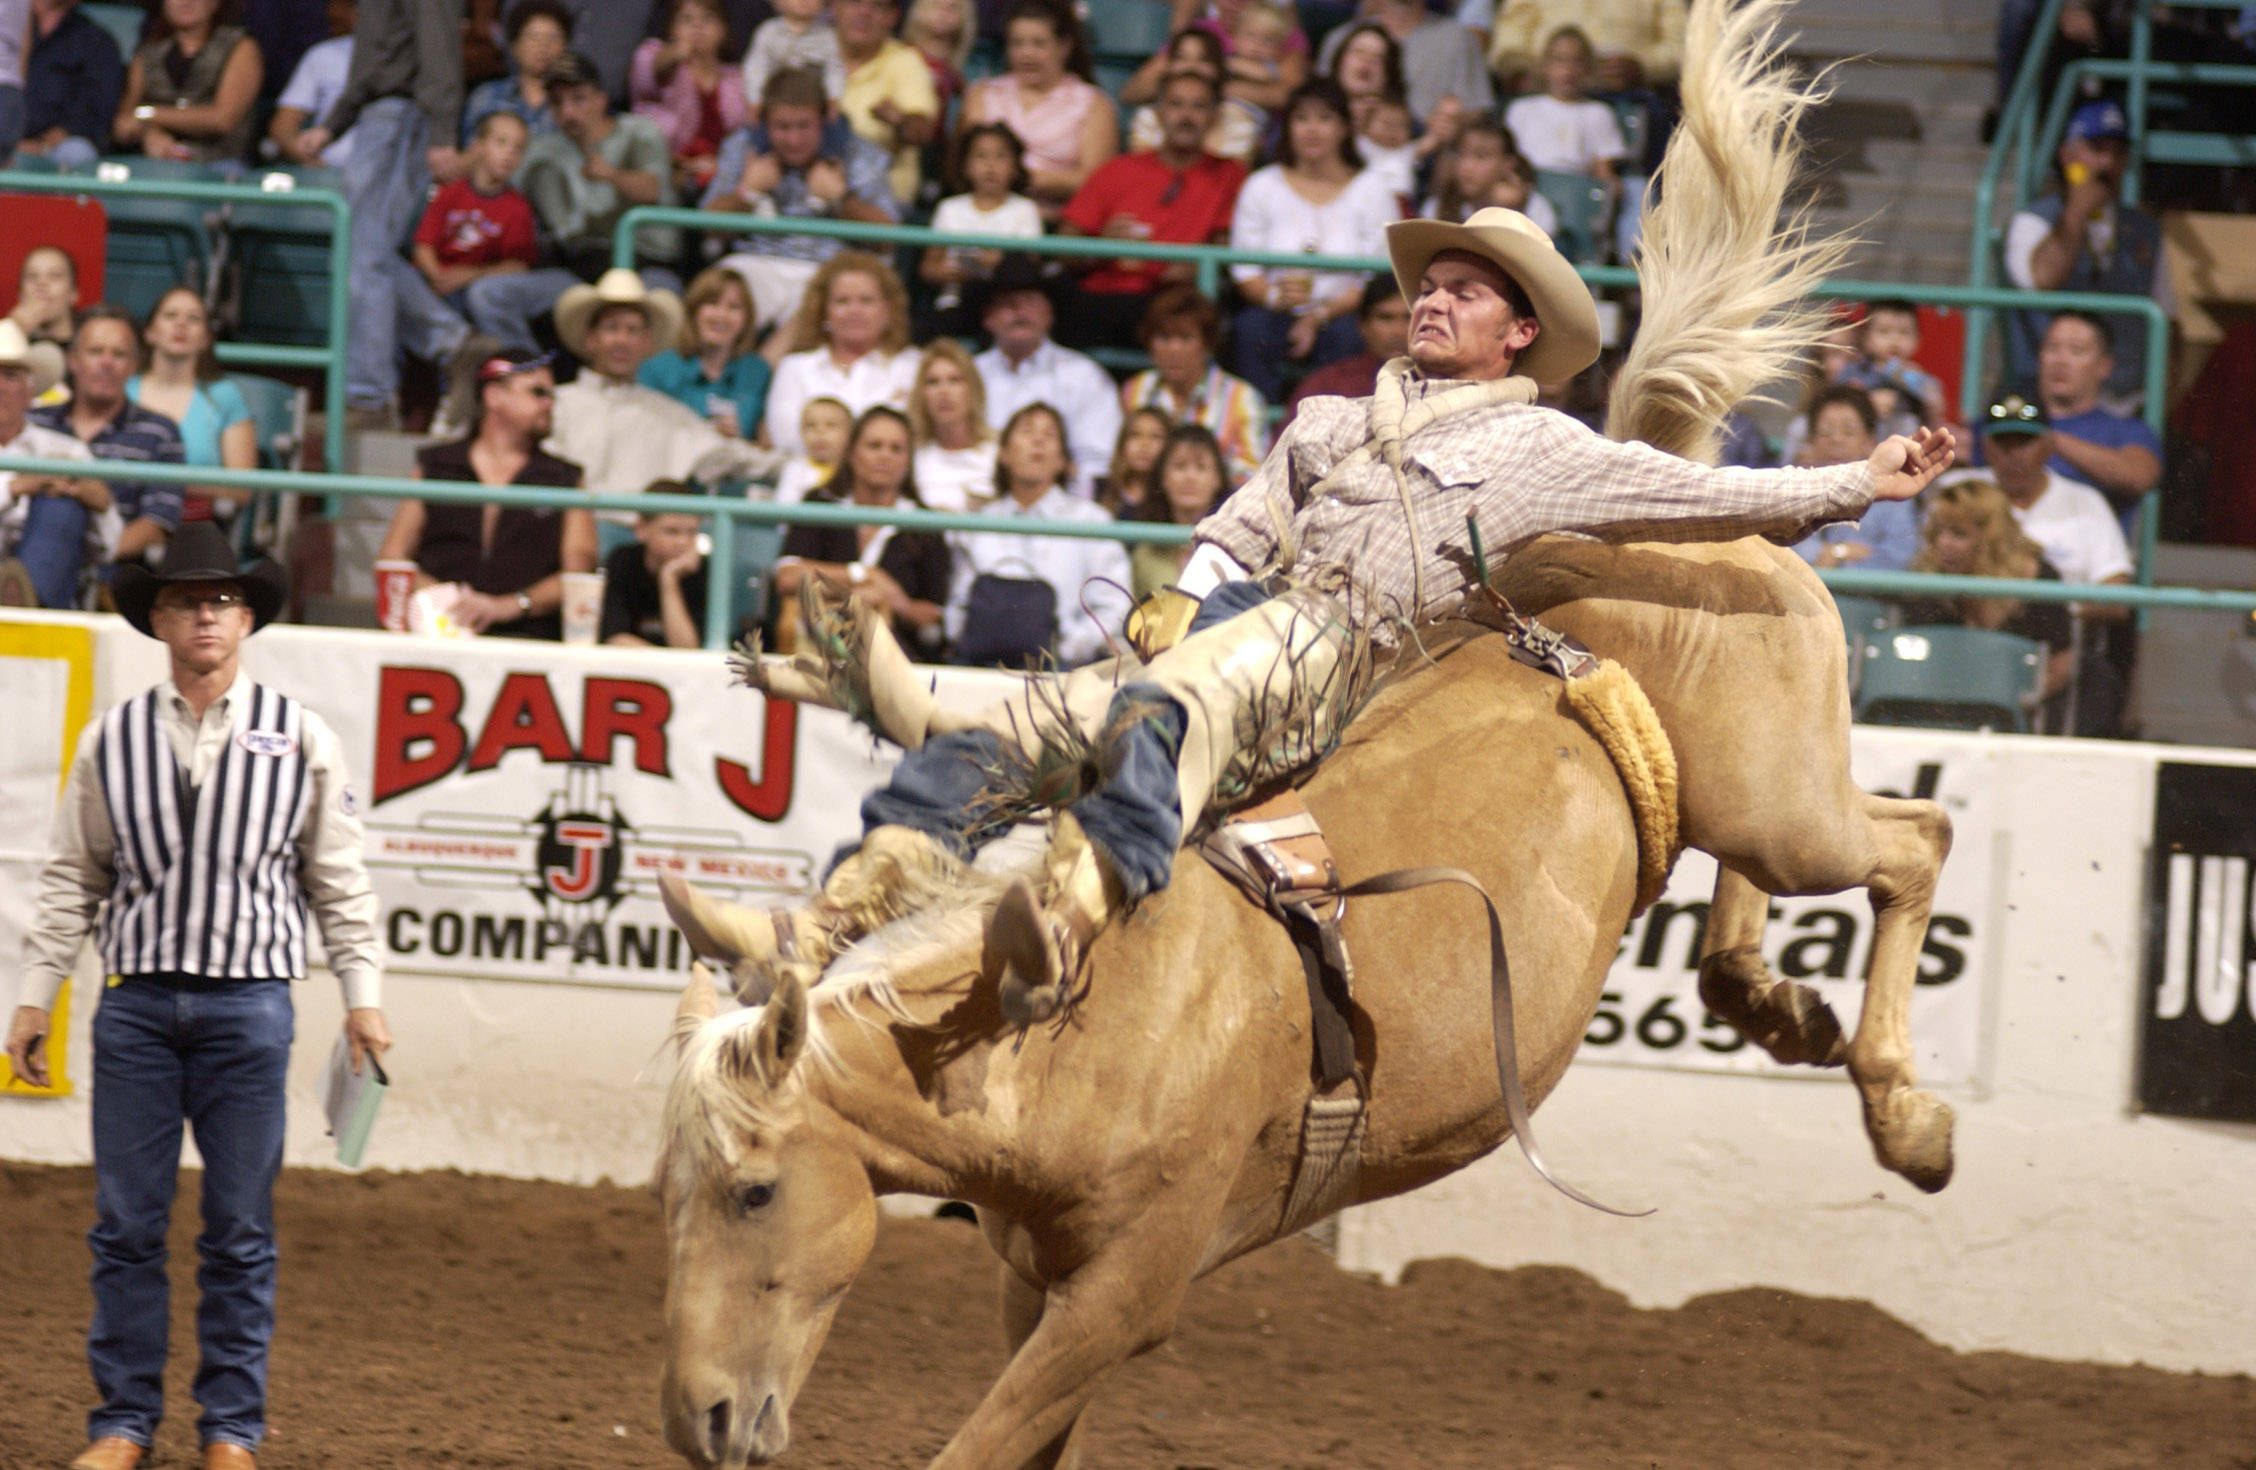 PRCA Wallpaper. PRCA Wallpaper, PRCA Rodeo Background and